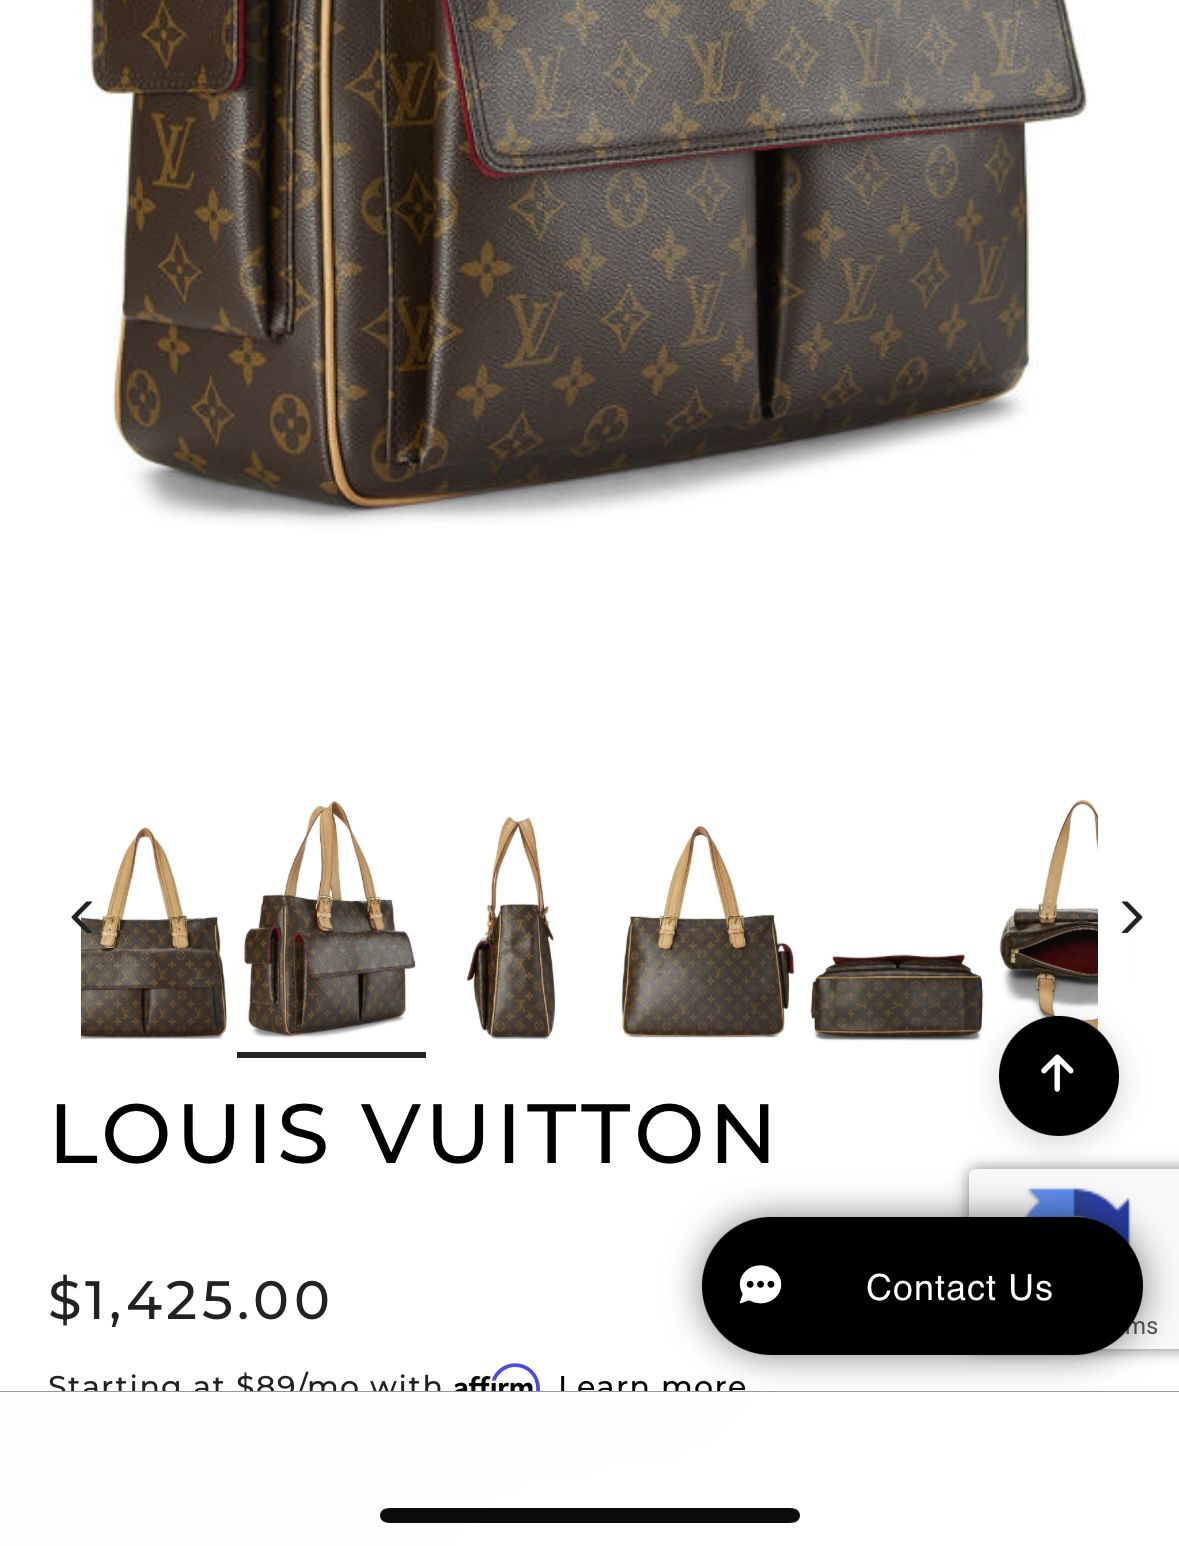 Louis Vuitton Two Pocket tote for Sale in El Cajon, CA - OfferUp